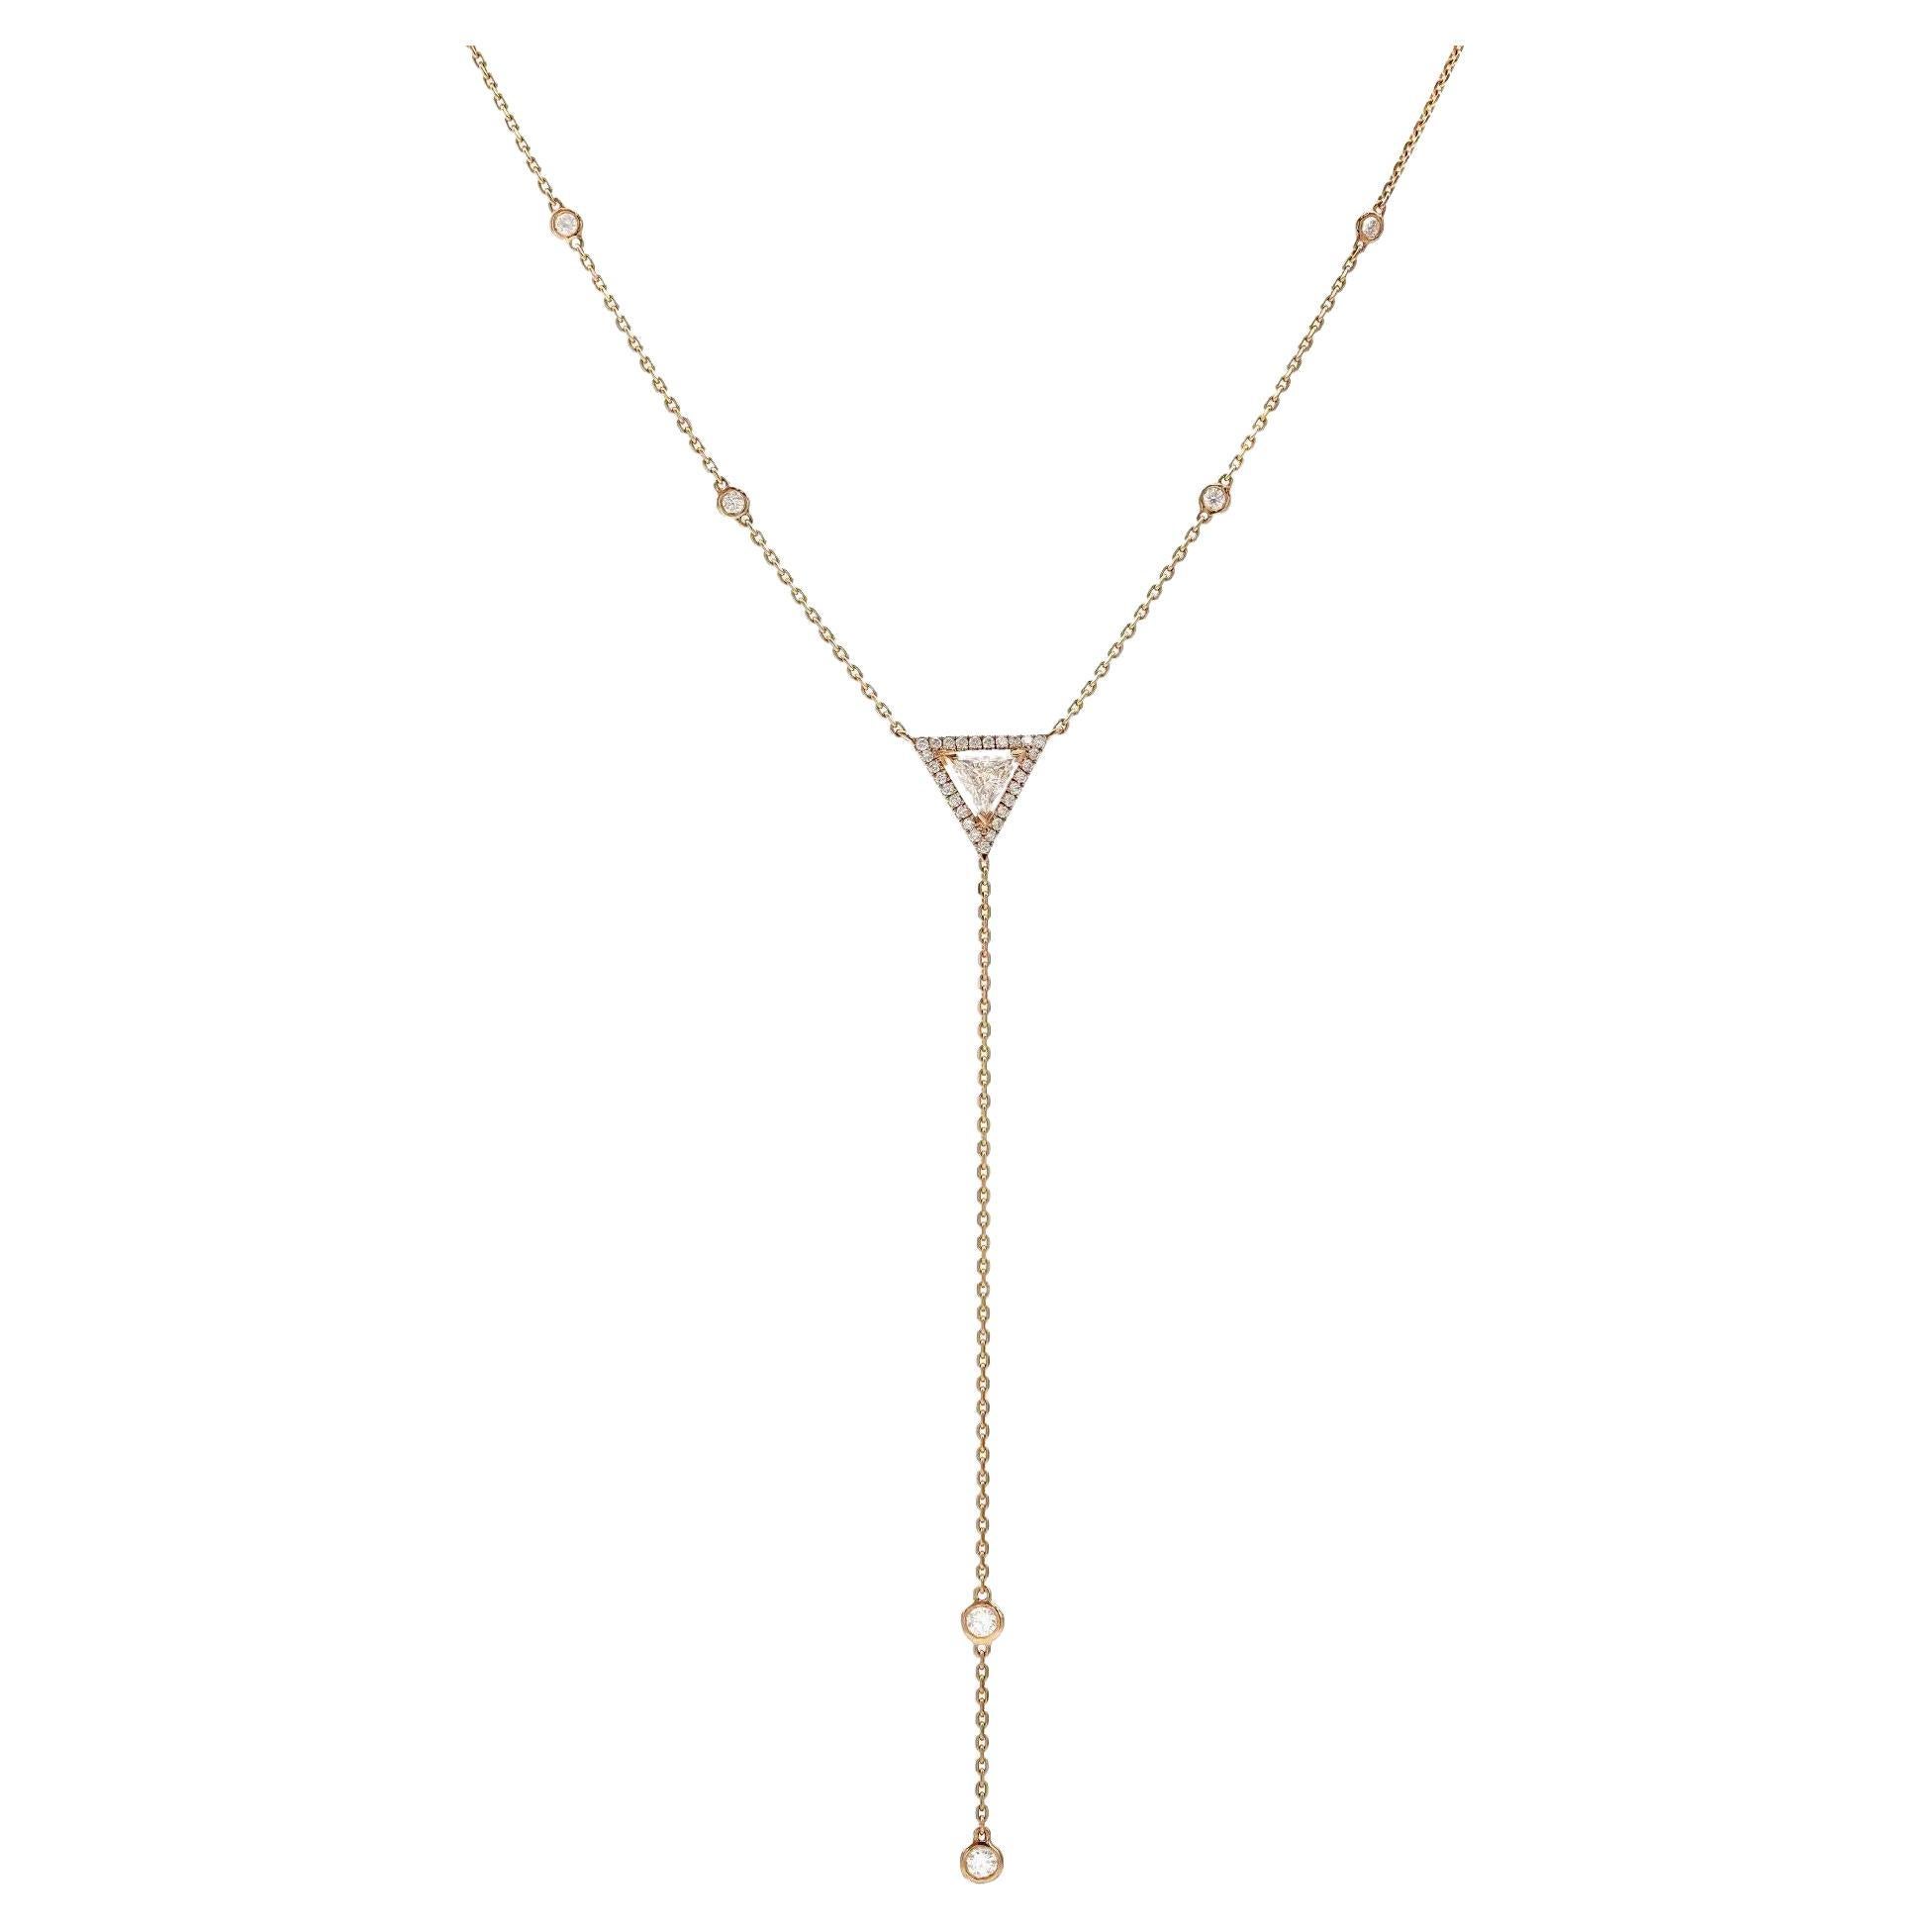 Messika 0.83Cttw Cravate Thea Diamond Necklace 18K Rose Gold 